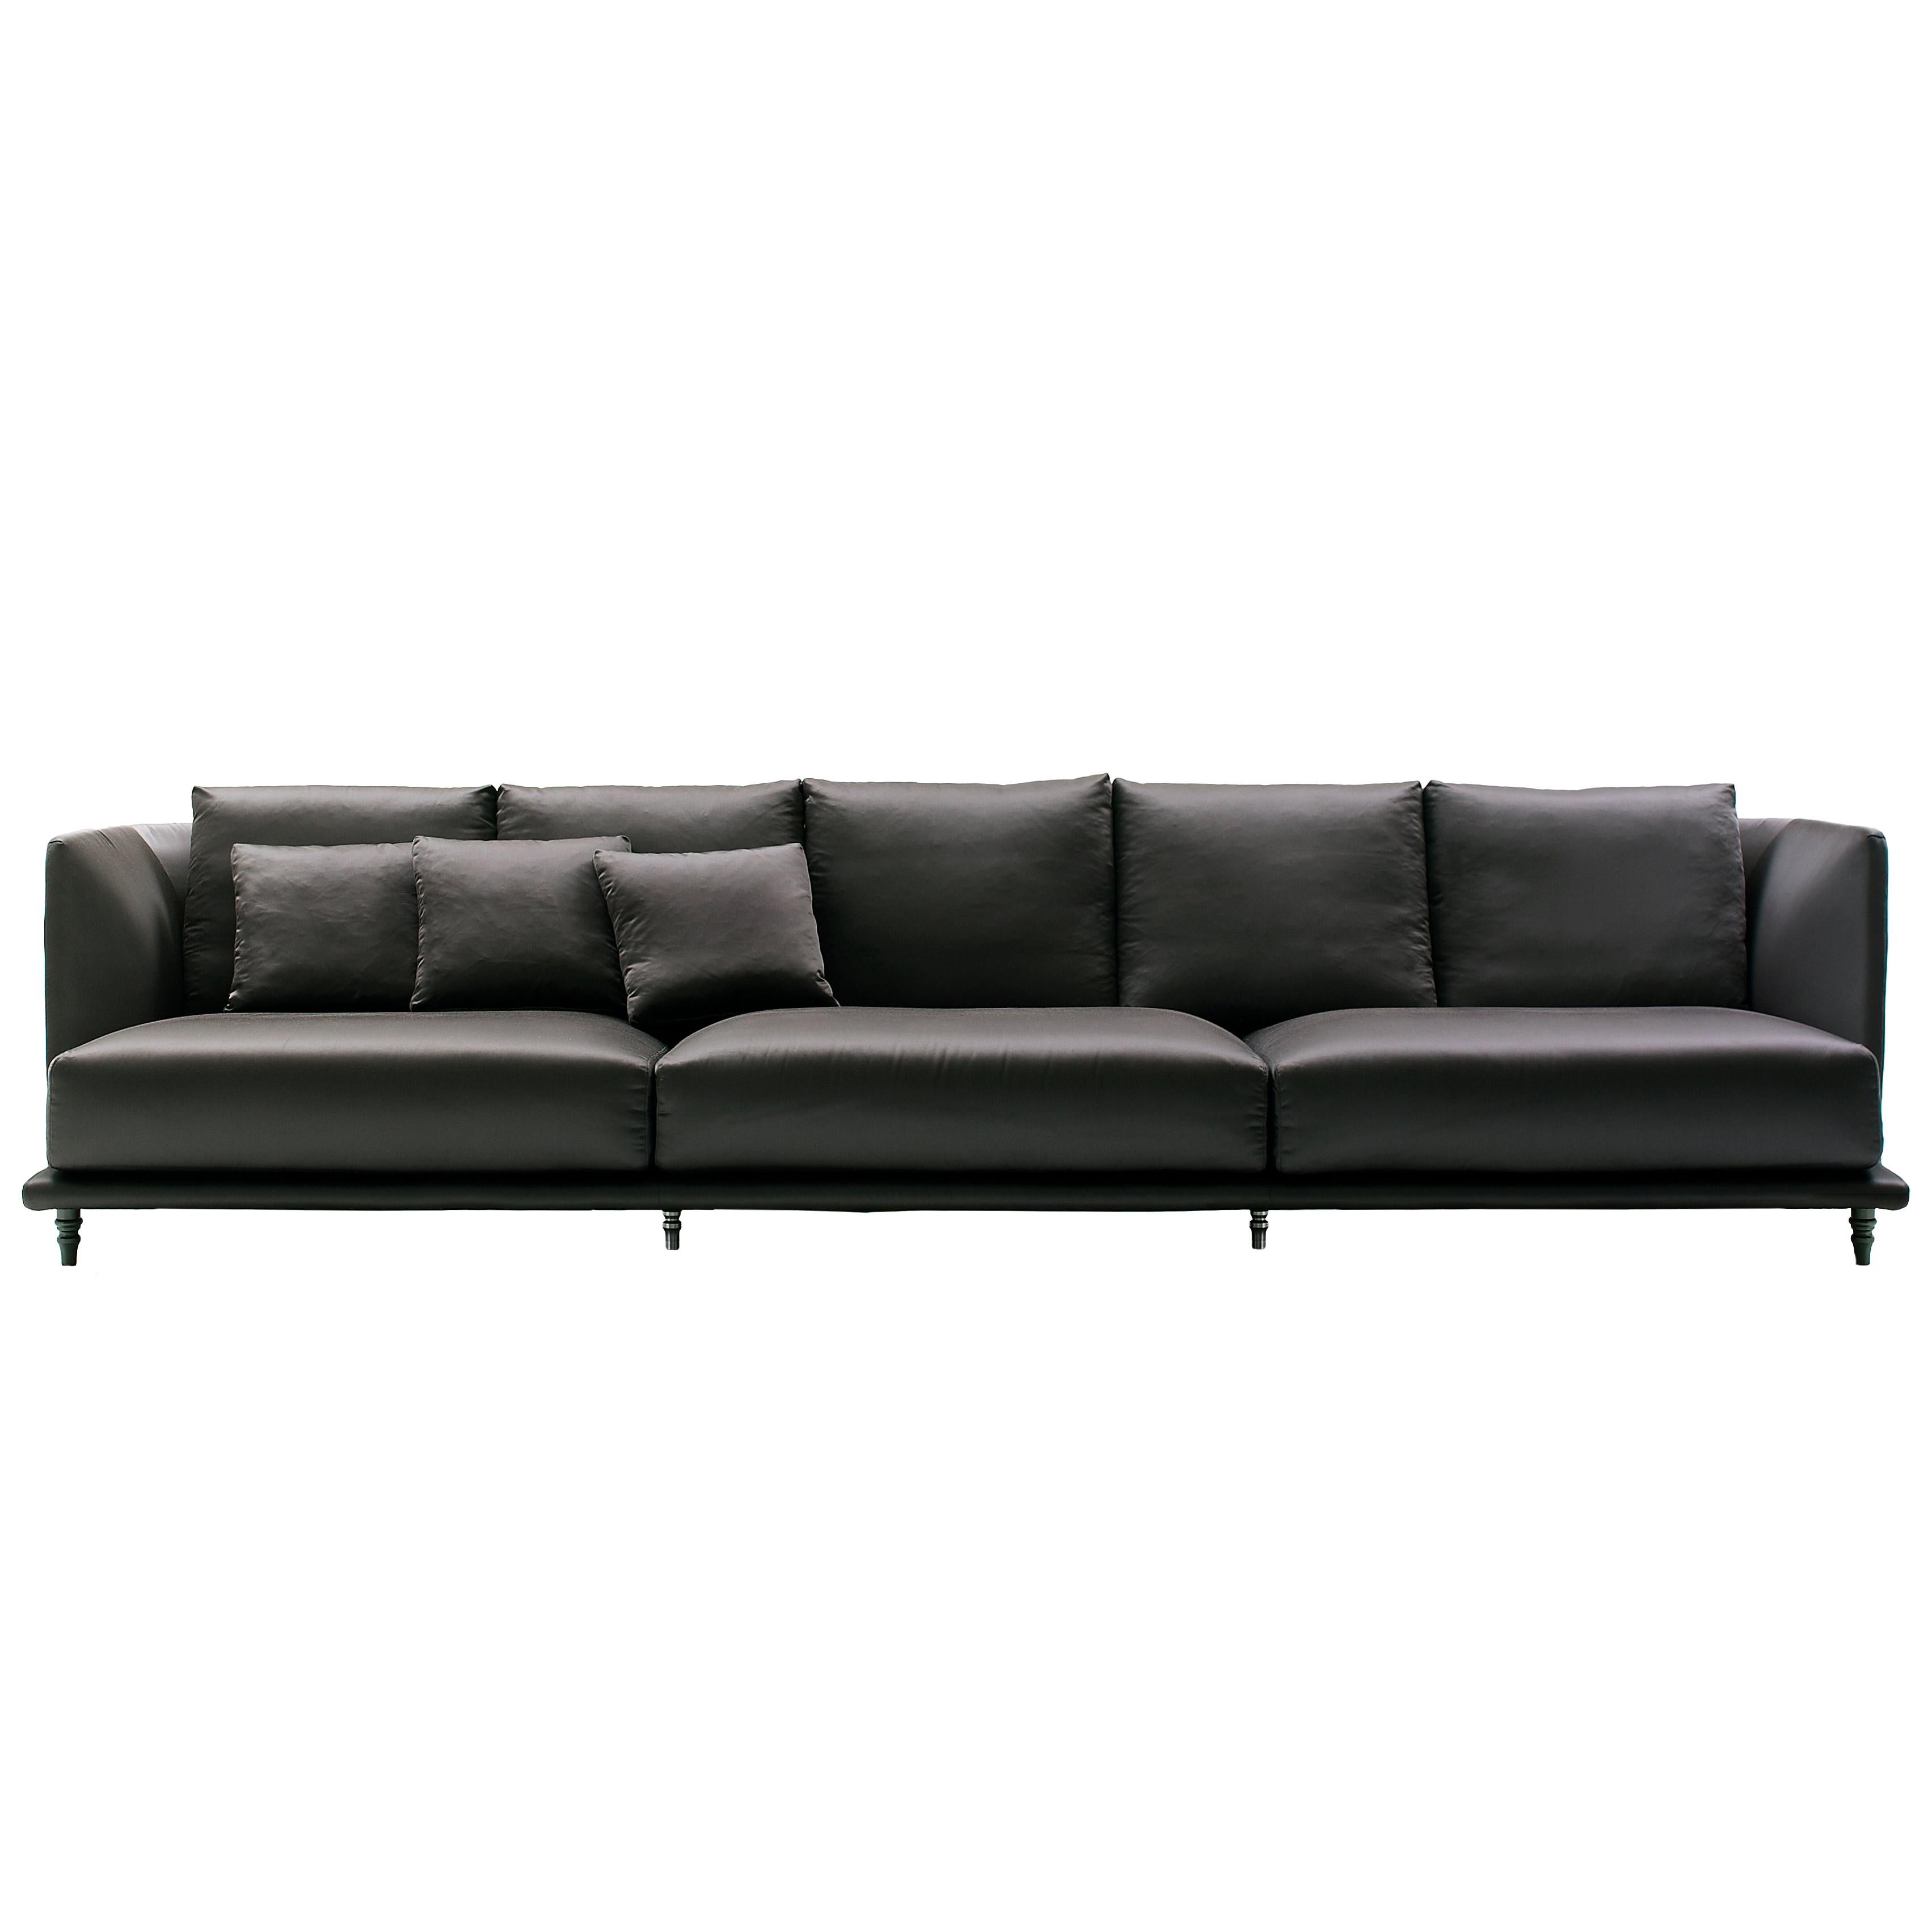 Nube Italia Remind Sofa in Black Leather by Carlo Colombo For Sale